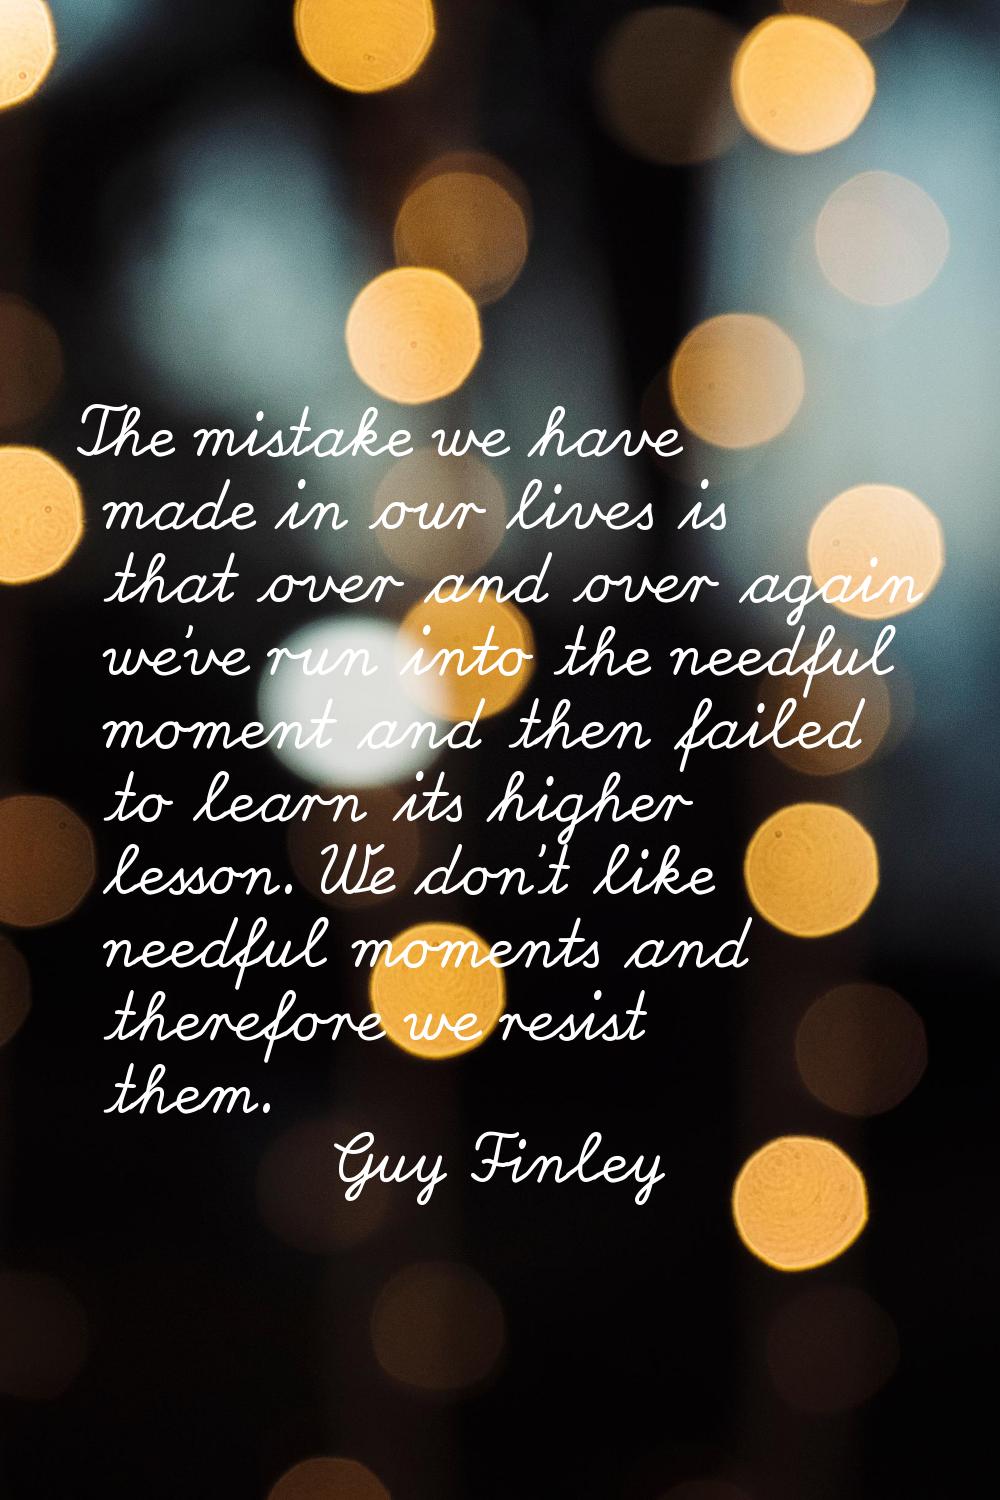 The mistake we have made in our lives is that over and over again we've run into the needful moment